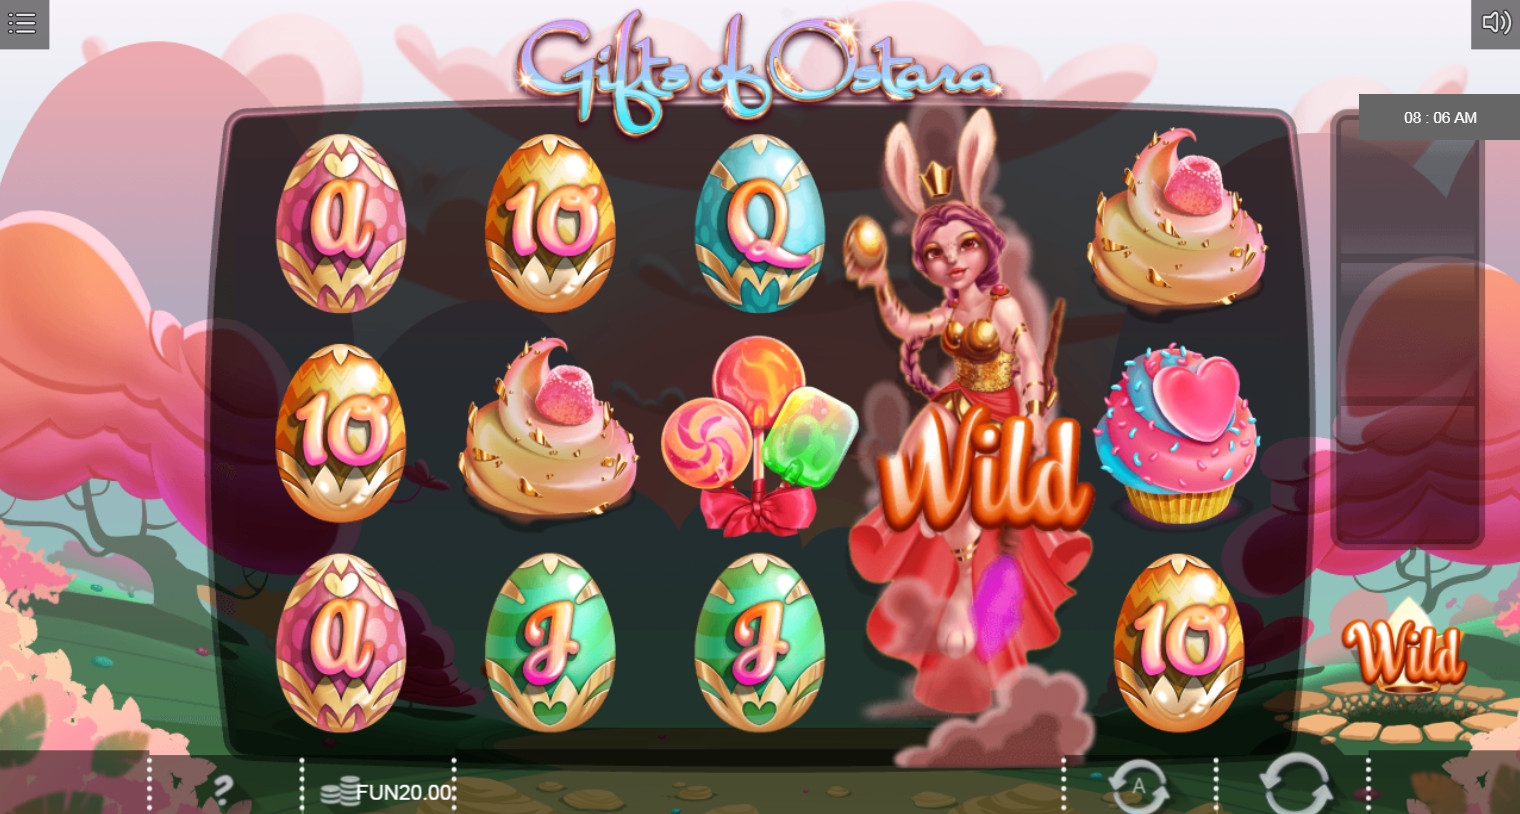 Gifts of Ostara (Gifts of Ostara) from category Slots